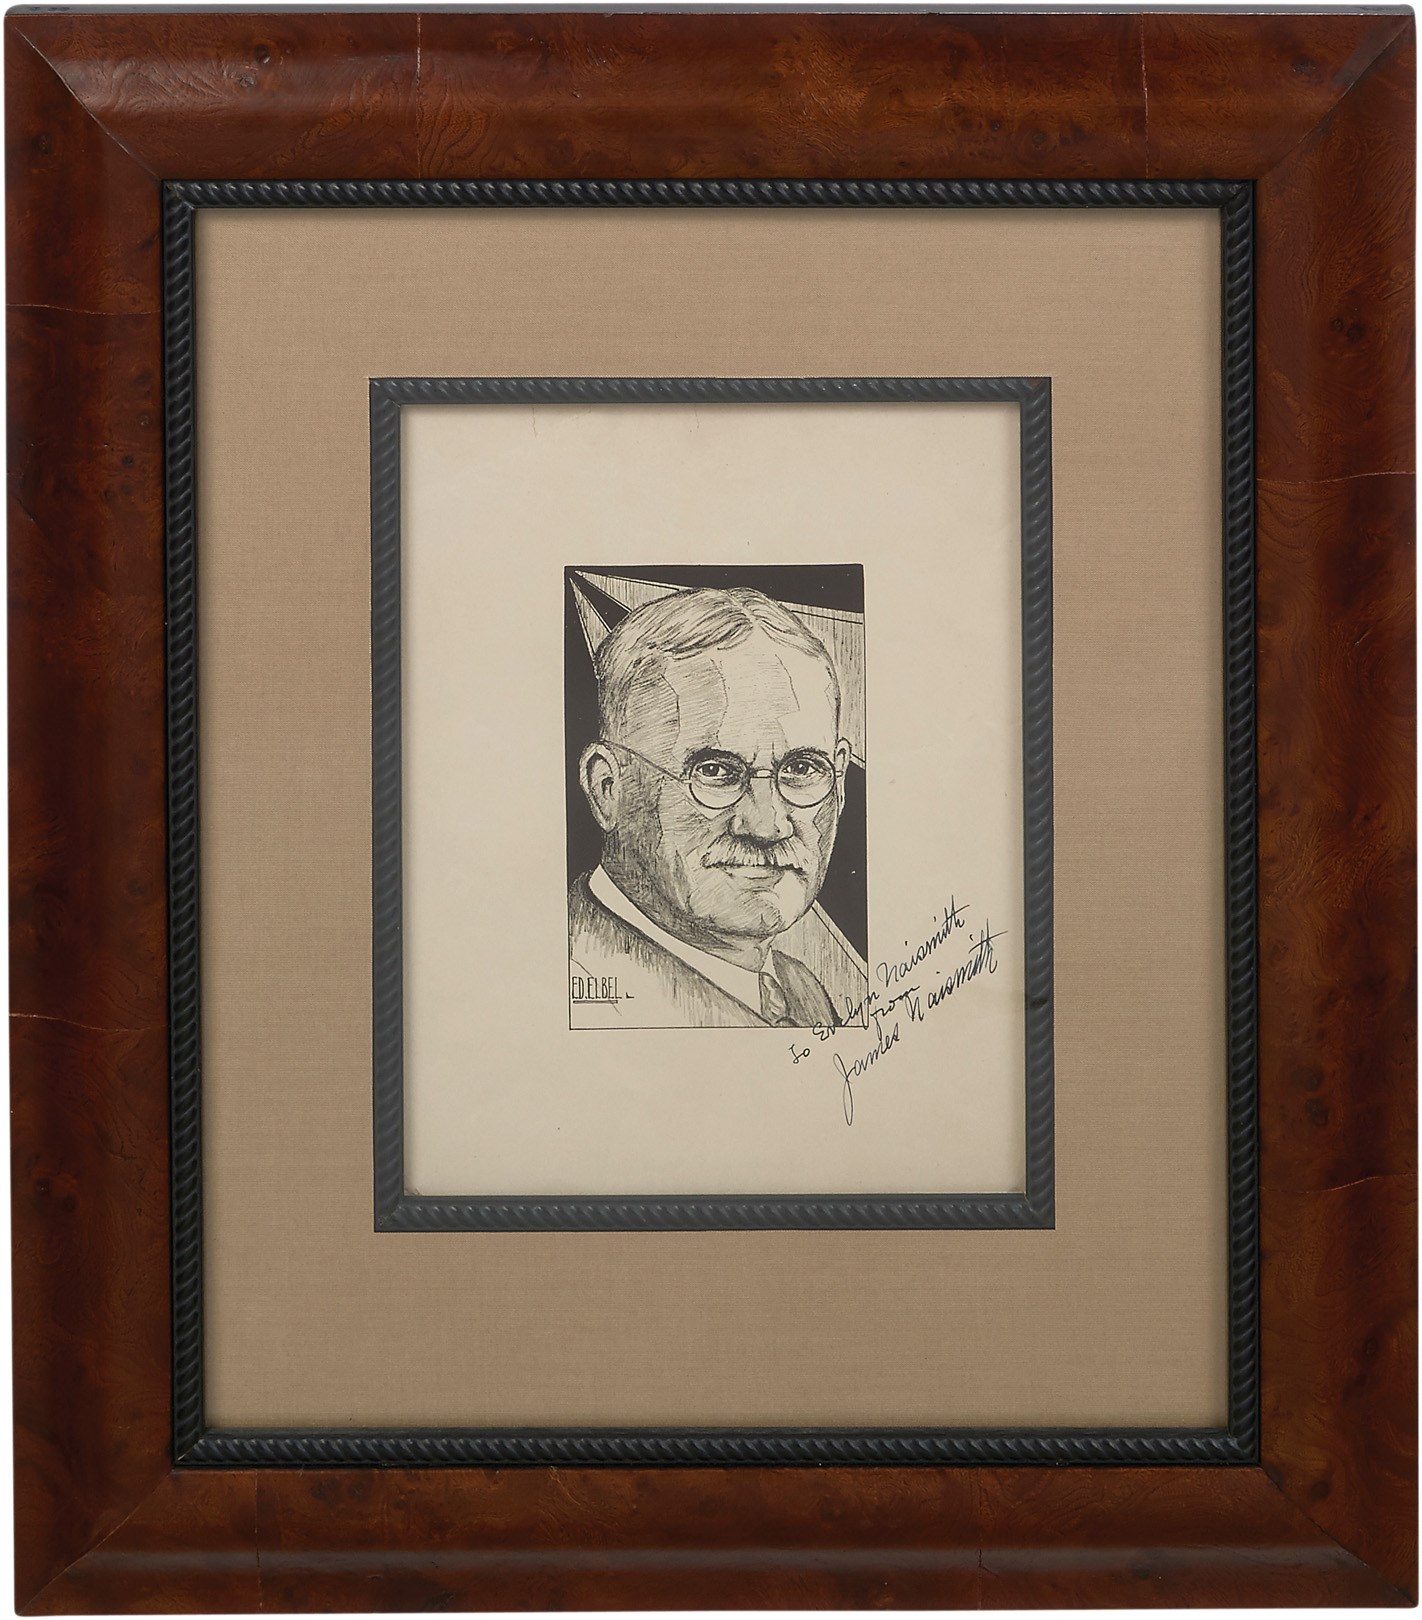 - 1936 James Naismith Signed Photograph to His Wife (JSA)